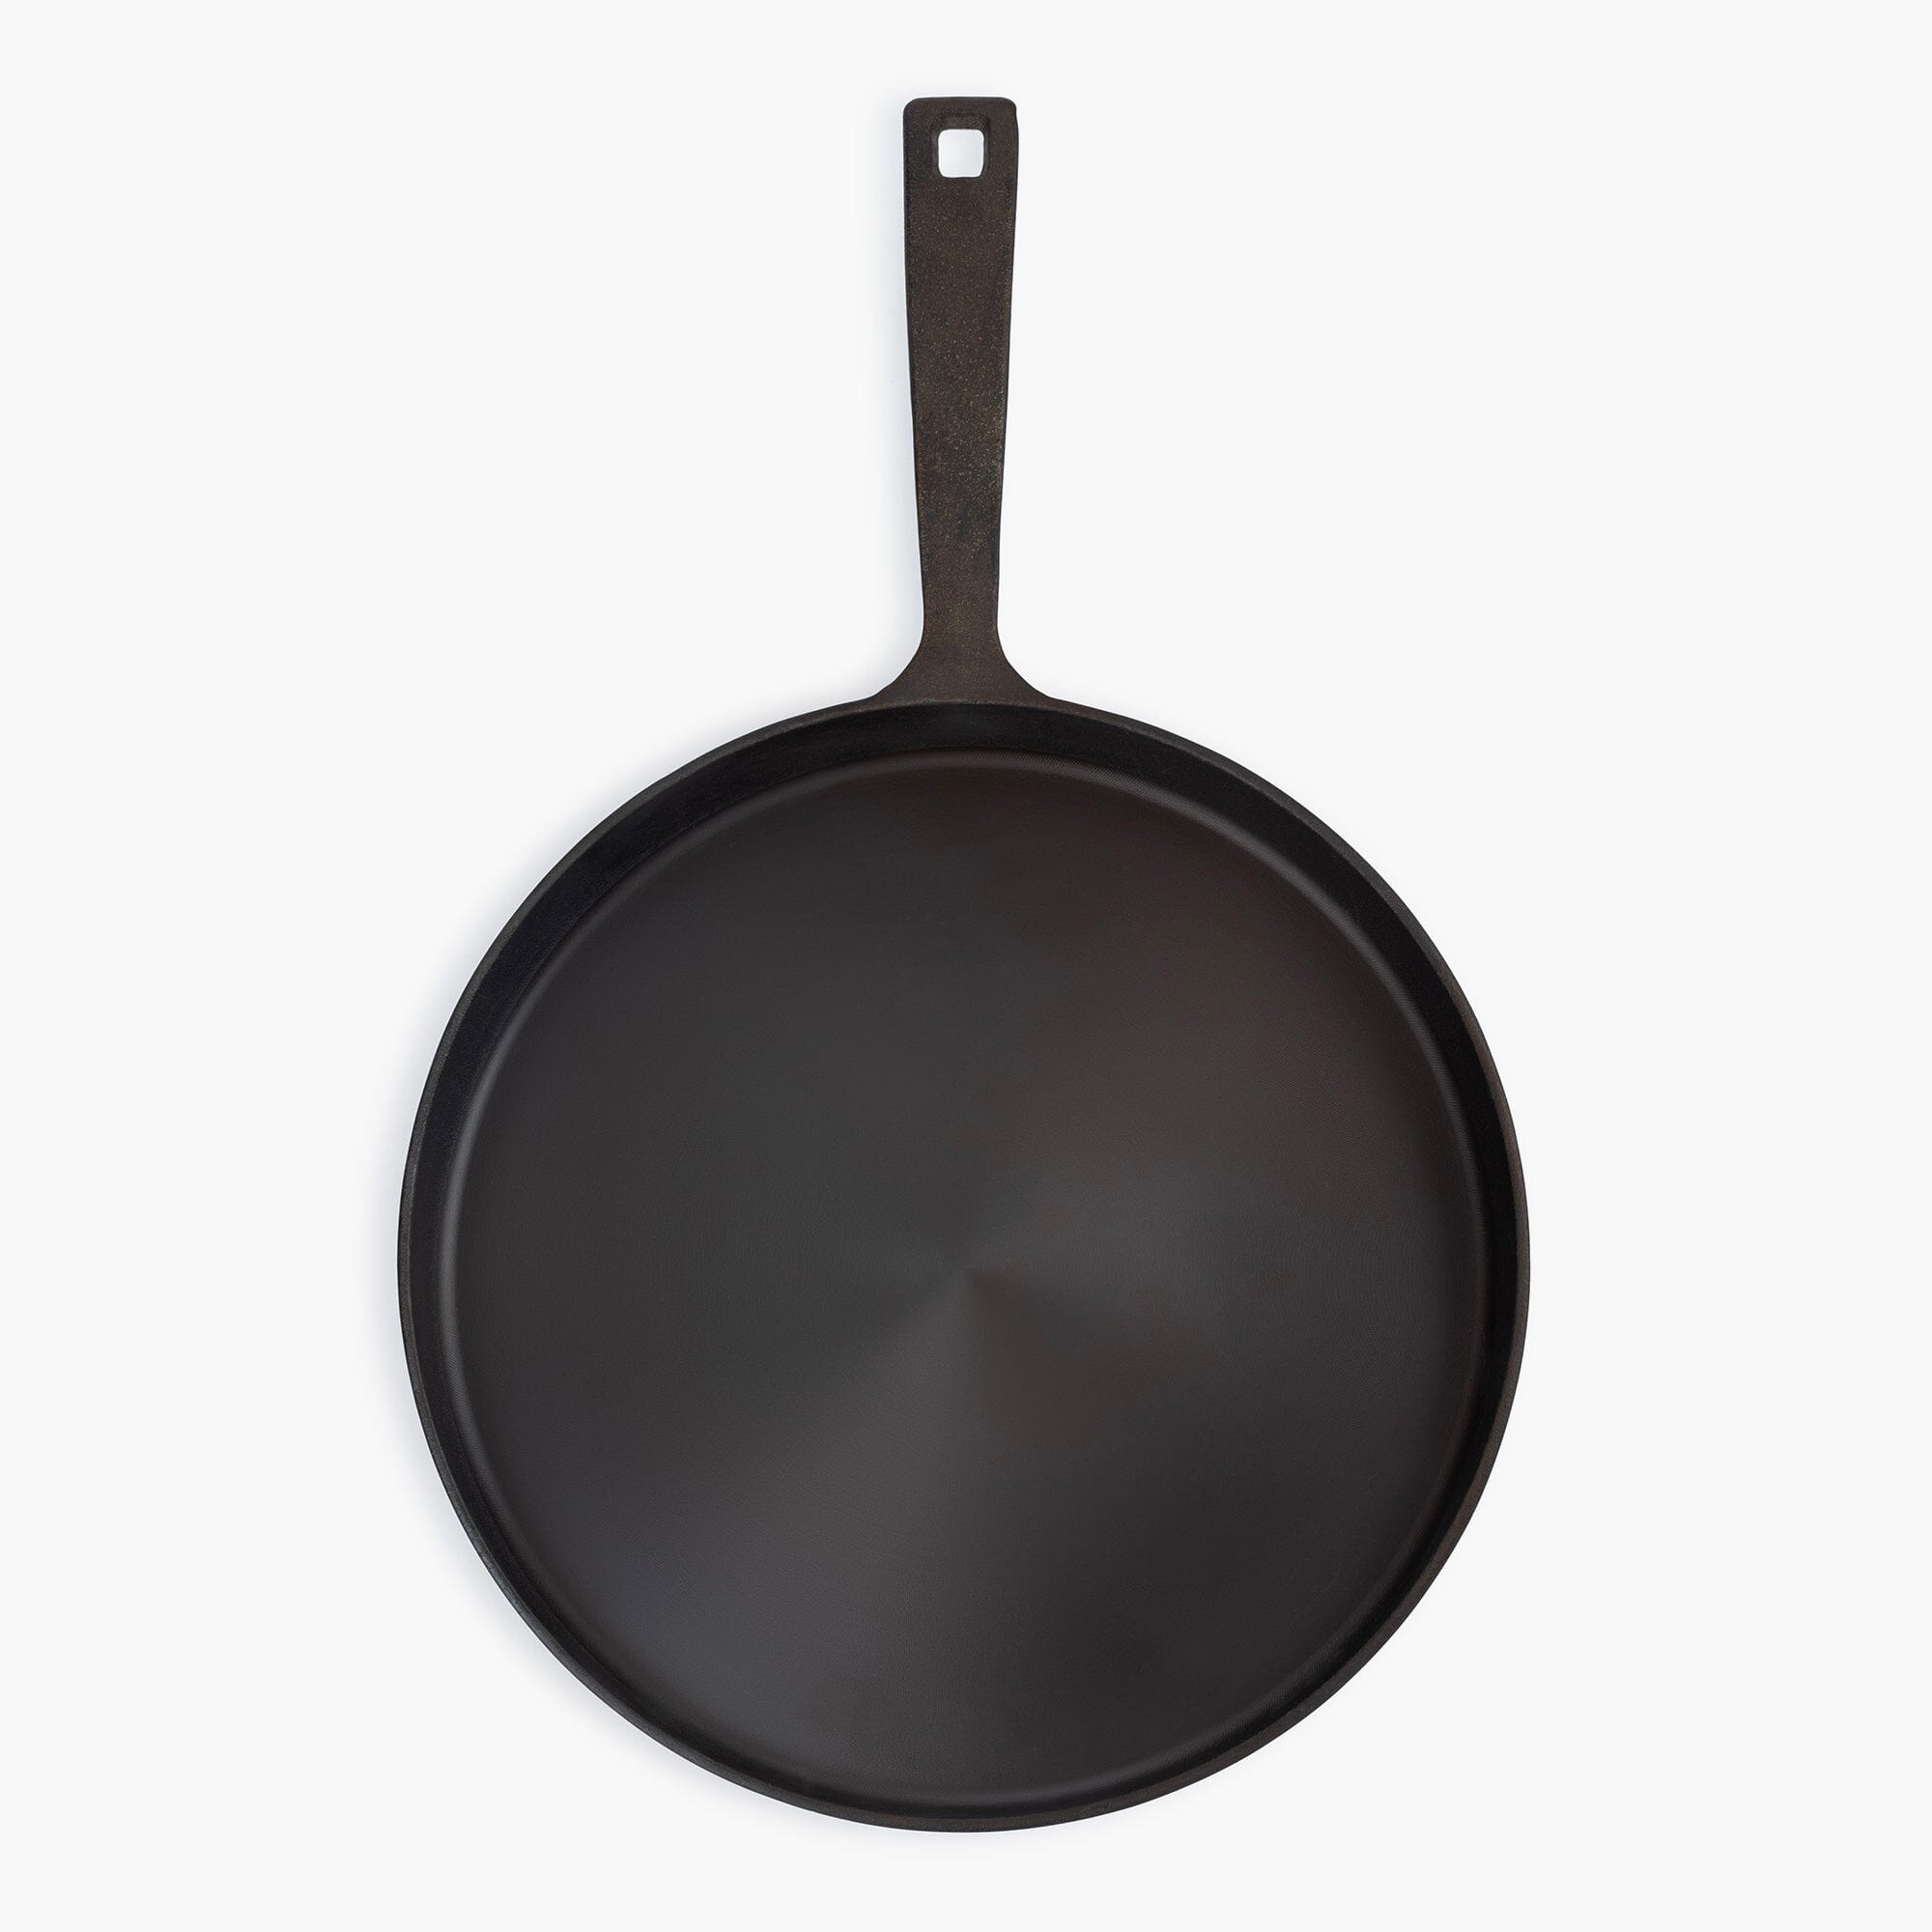  Home Basics Cast Iron Skillet Griddle (Black) Iron Griddle For  Pancakes, Bacon, Burgers, and More, Nonstick Large Cast Iron Griddle With  Handles